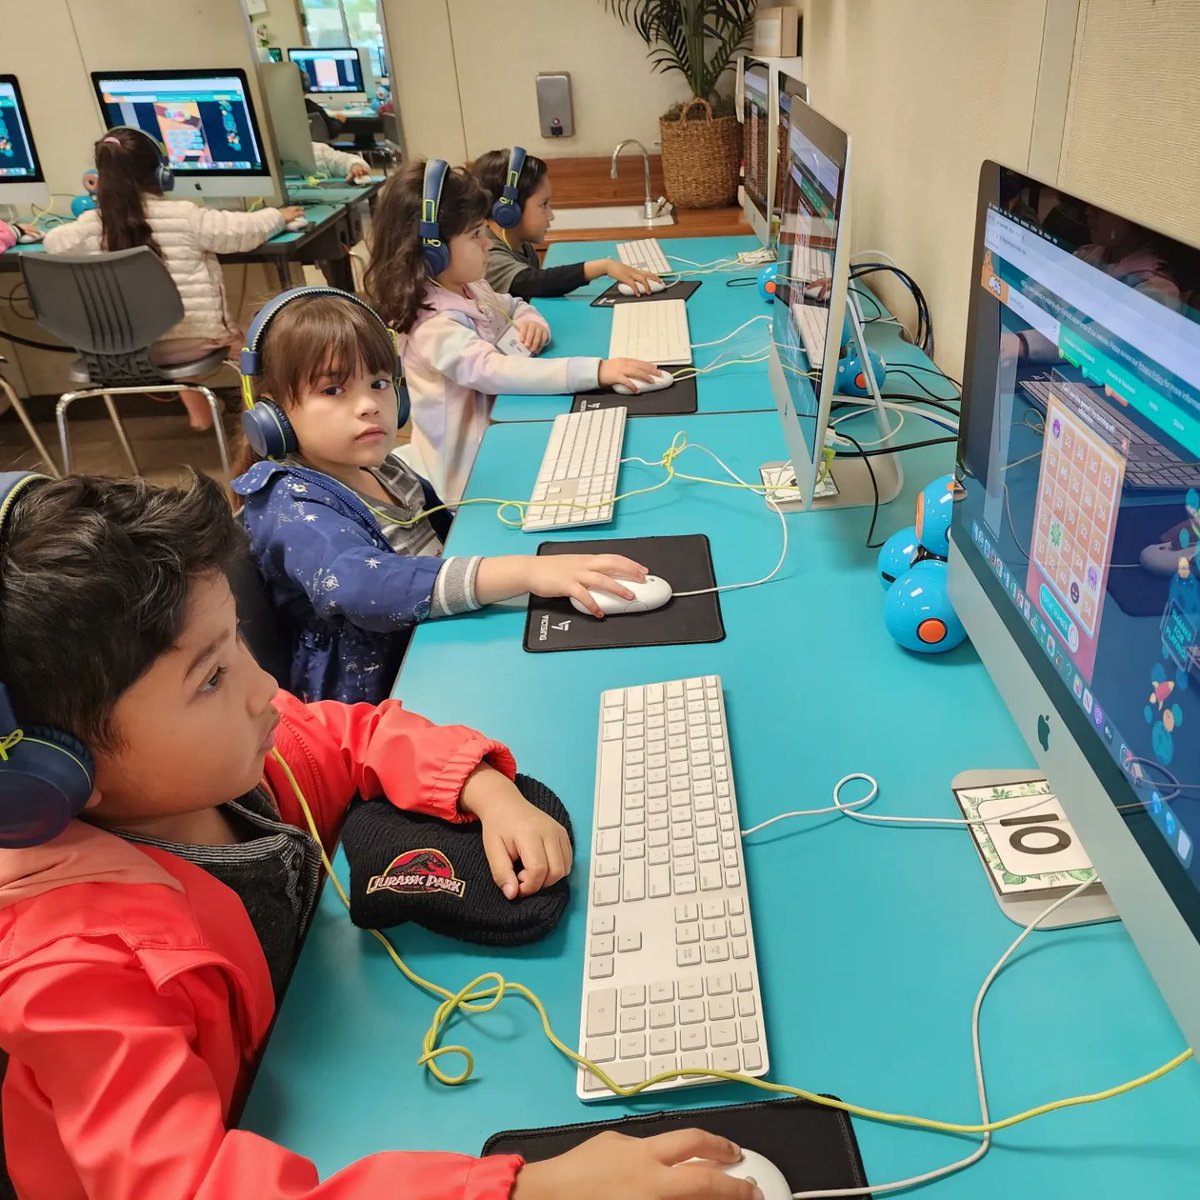 Happy March Vanalden! New month, new day, new learning--like Kinder students in The Orchard adding to their computer skills!

@LASchools @LASchoolsNorth @ResedaCOS #IBelieveinLAUSD #ImaginethePossibilities2023